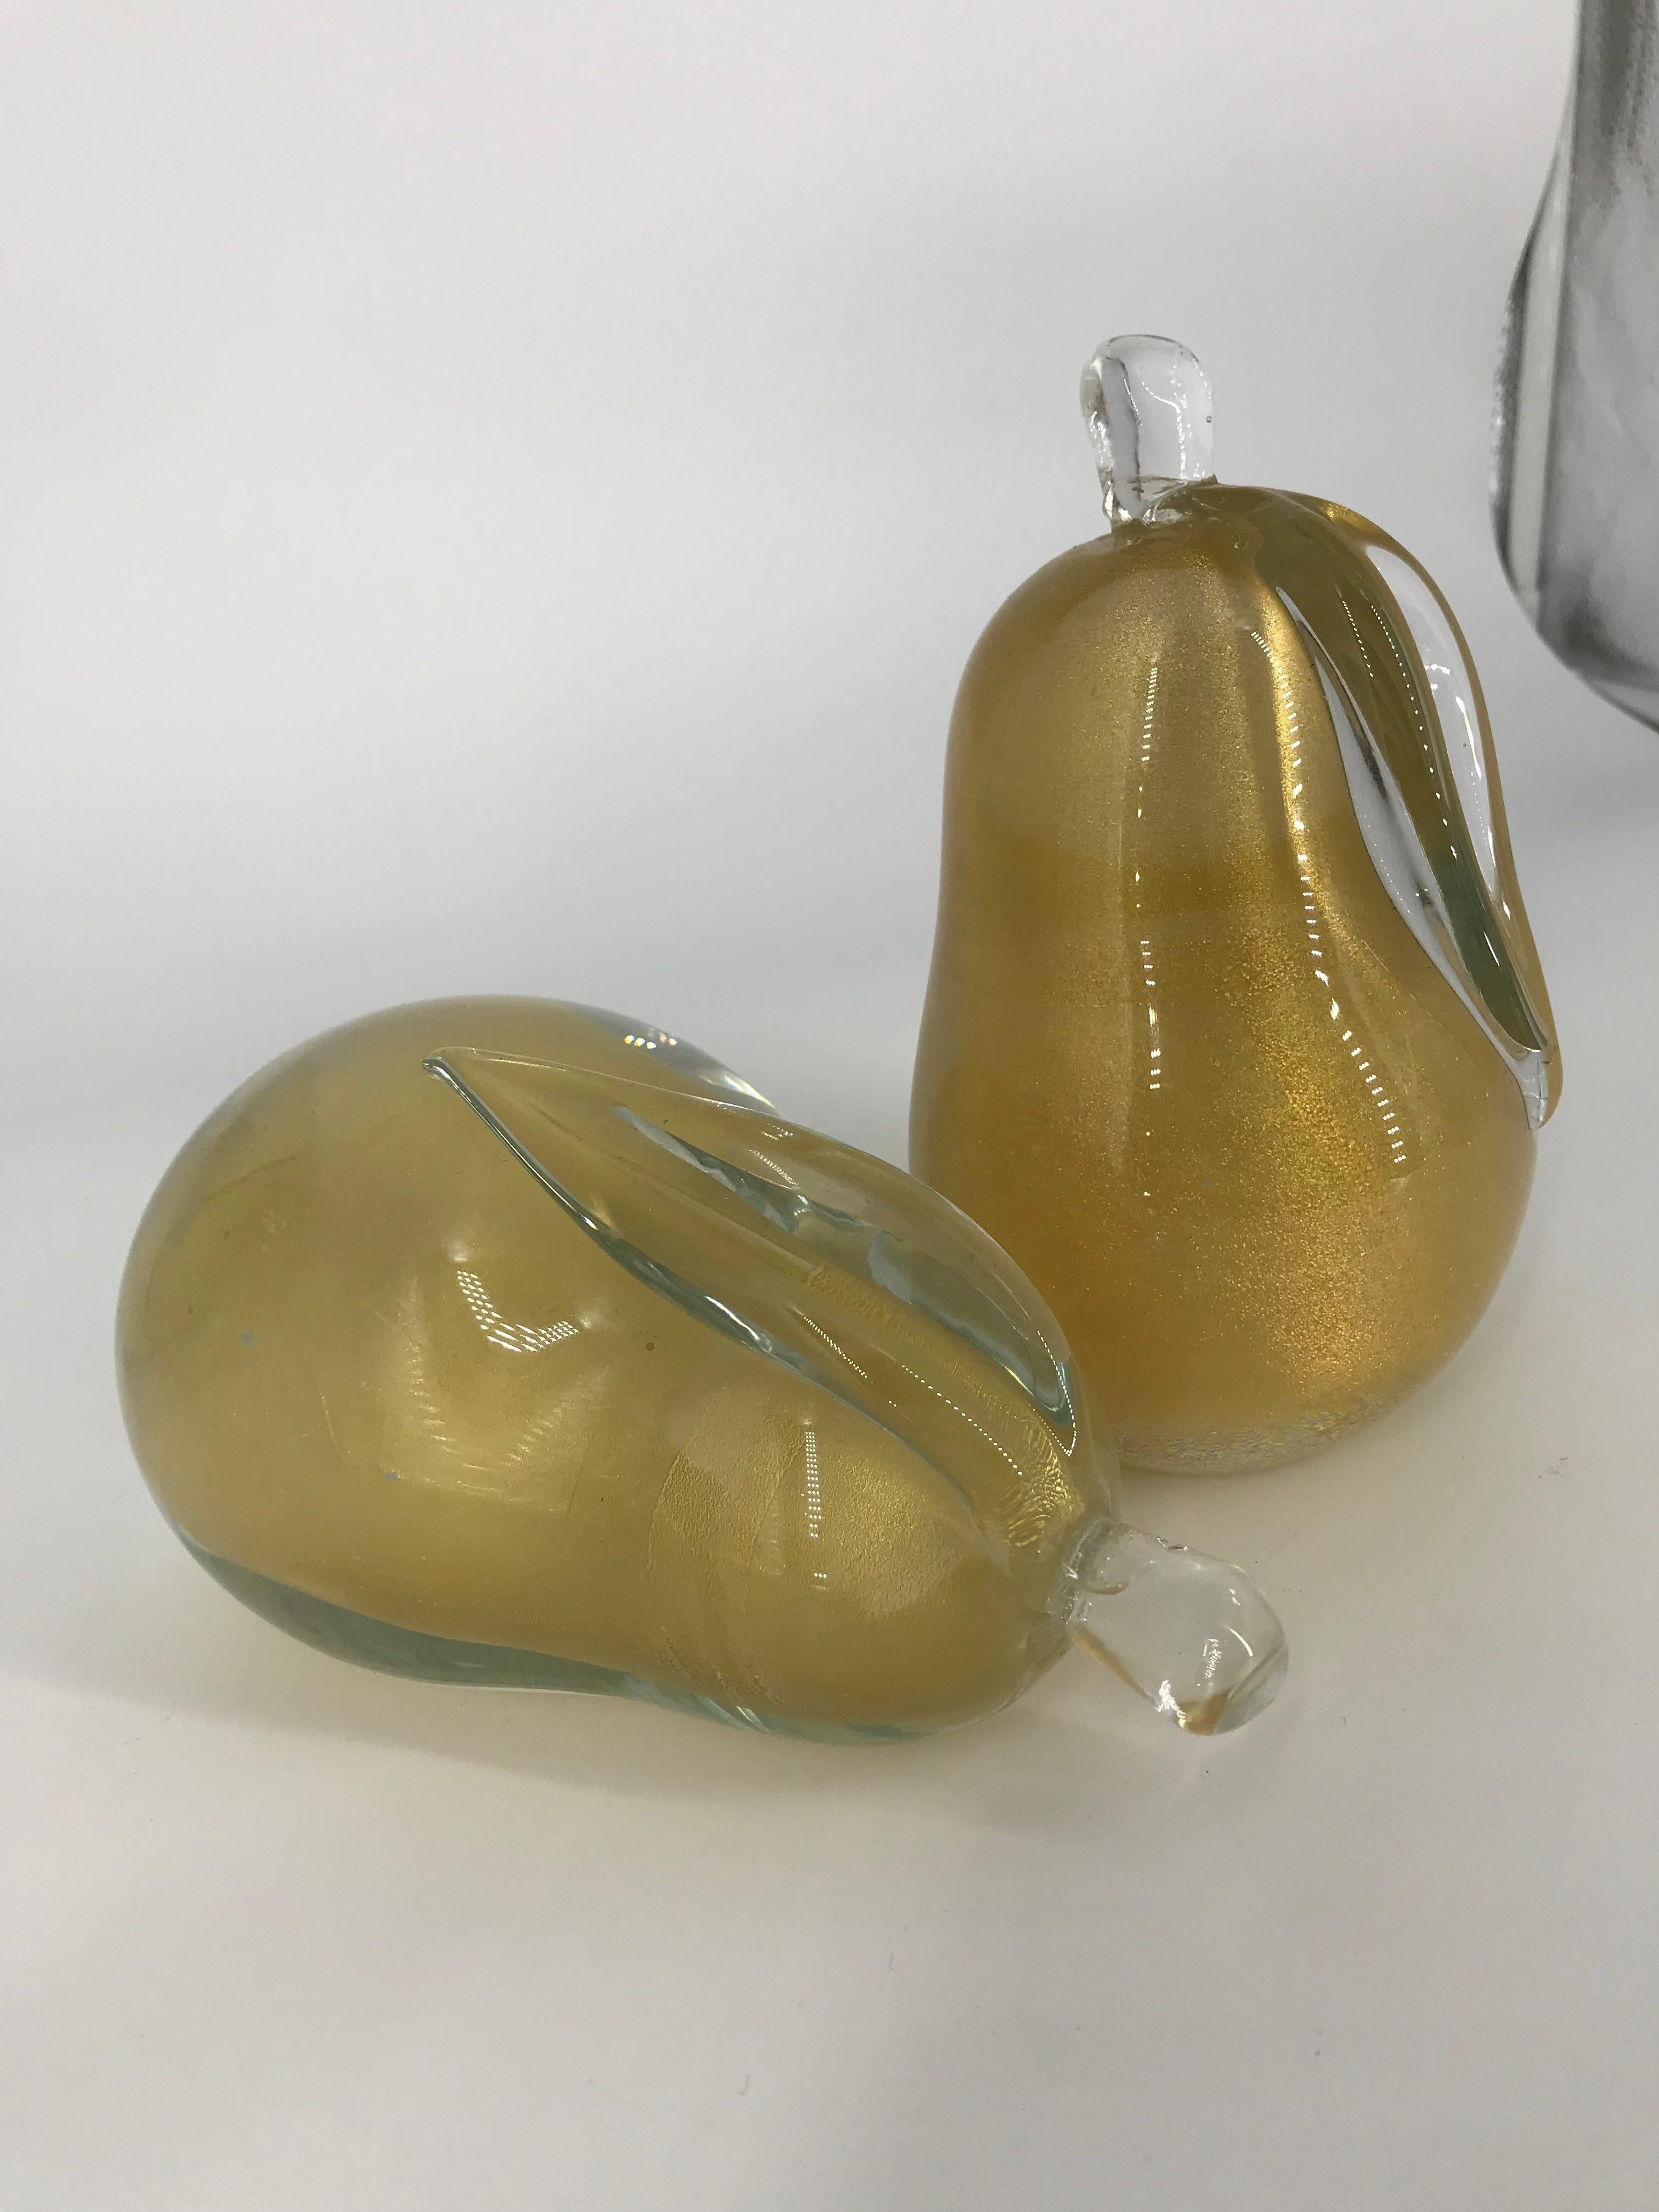 Modern Oranment Murano Glass Pears, Made in Italy, 2000's gold, set of 2